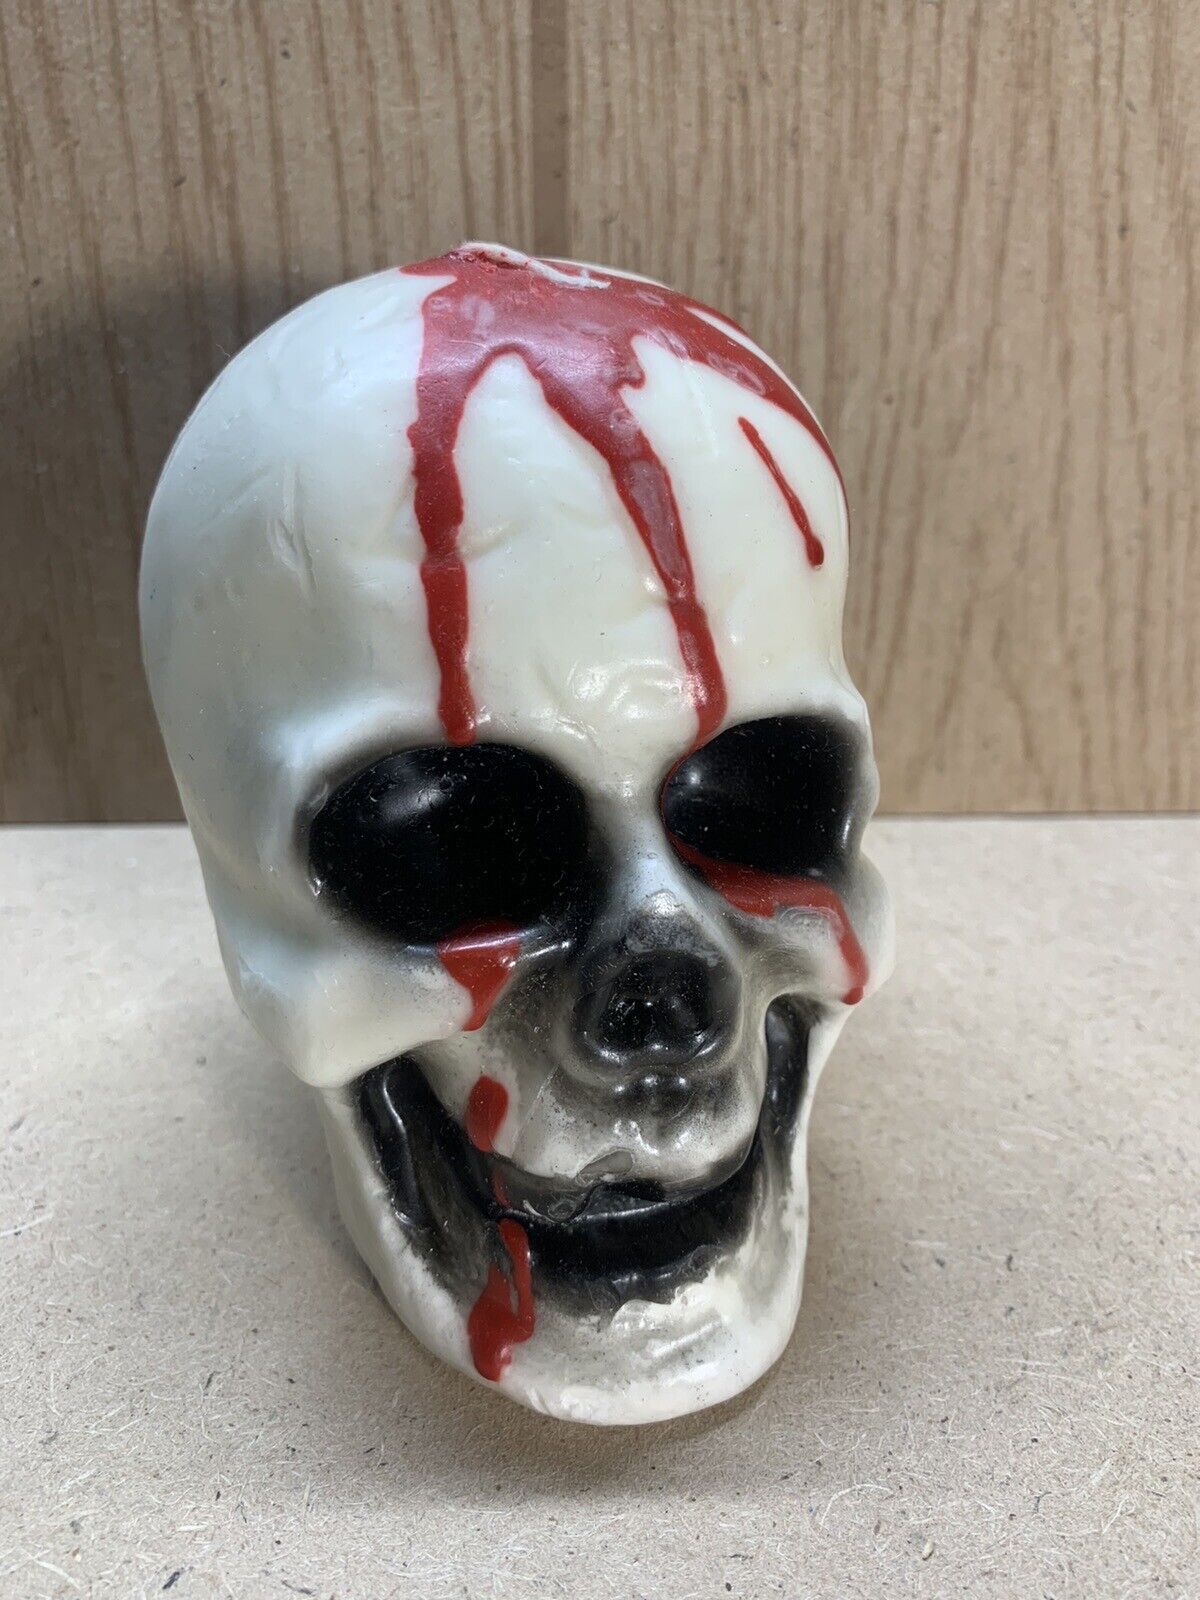 Vintage Gurley Novelty Candle Bloody Skull Halloween Decor Made in USA